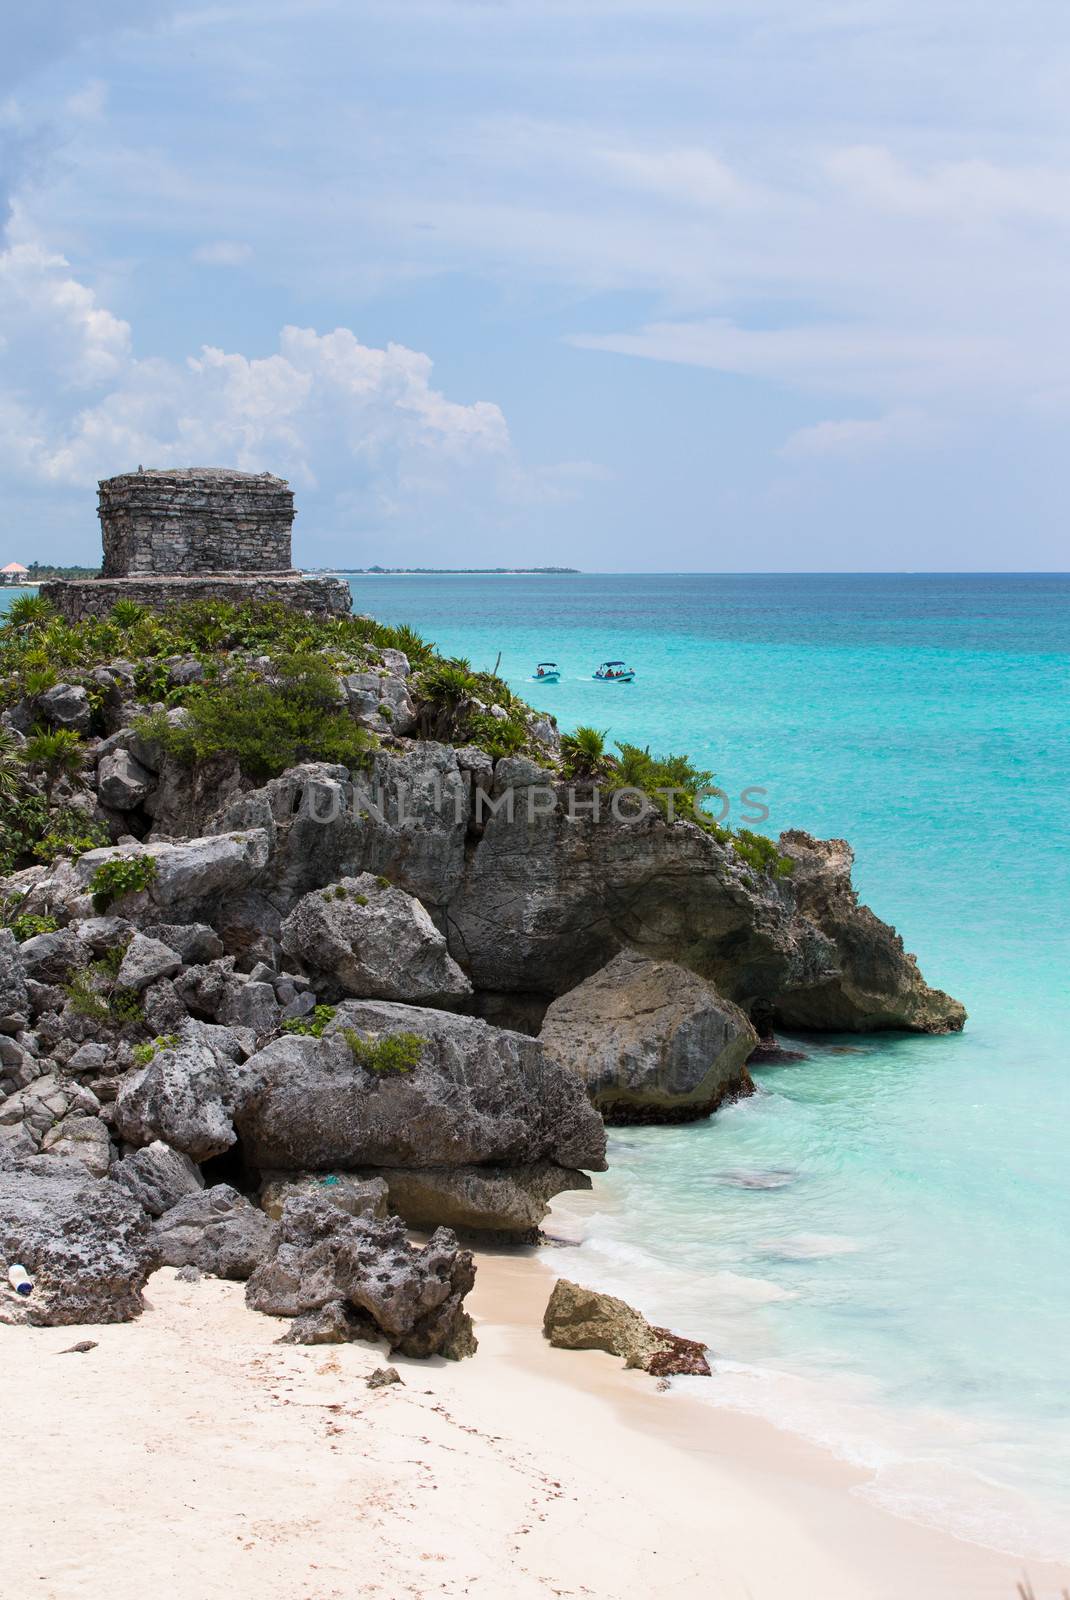 Offertories building at Tulum Mexico next to the Caribbean sea